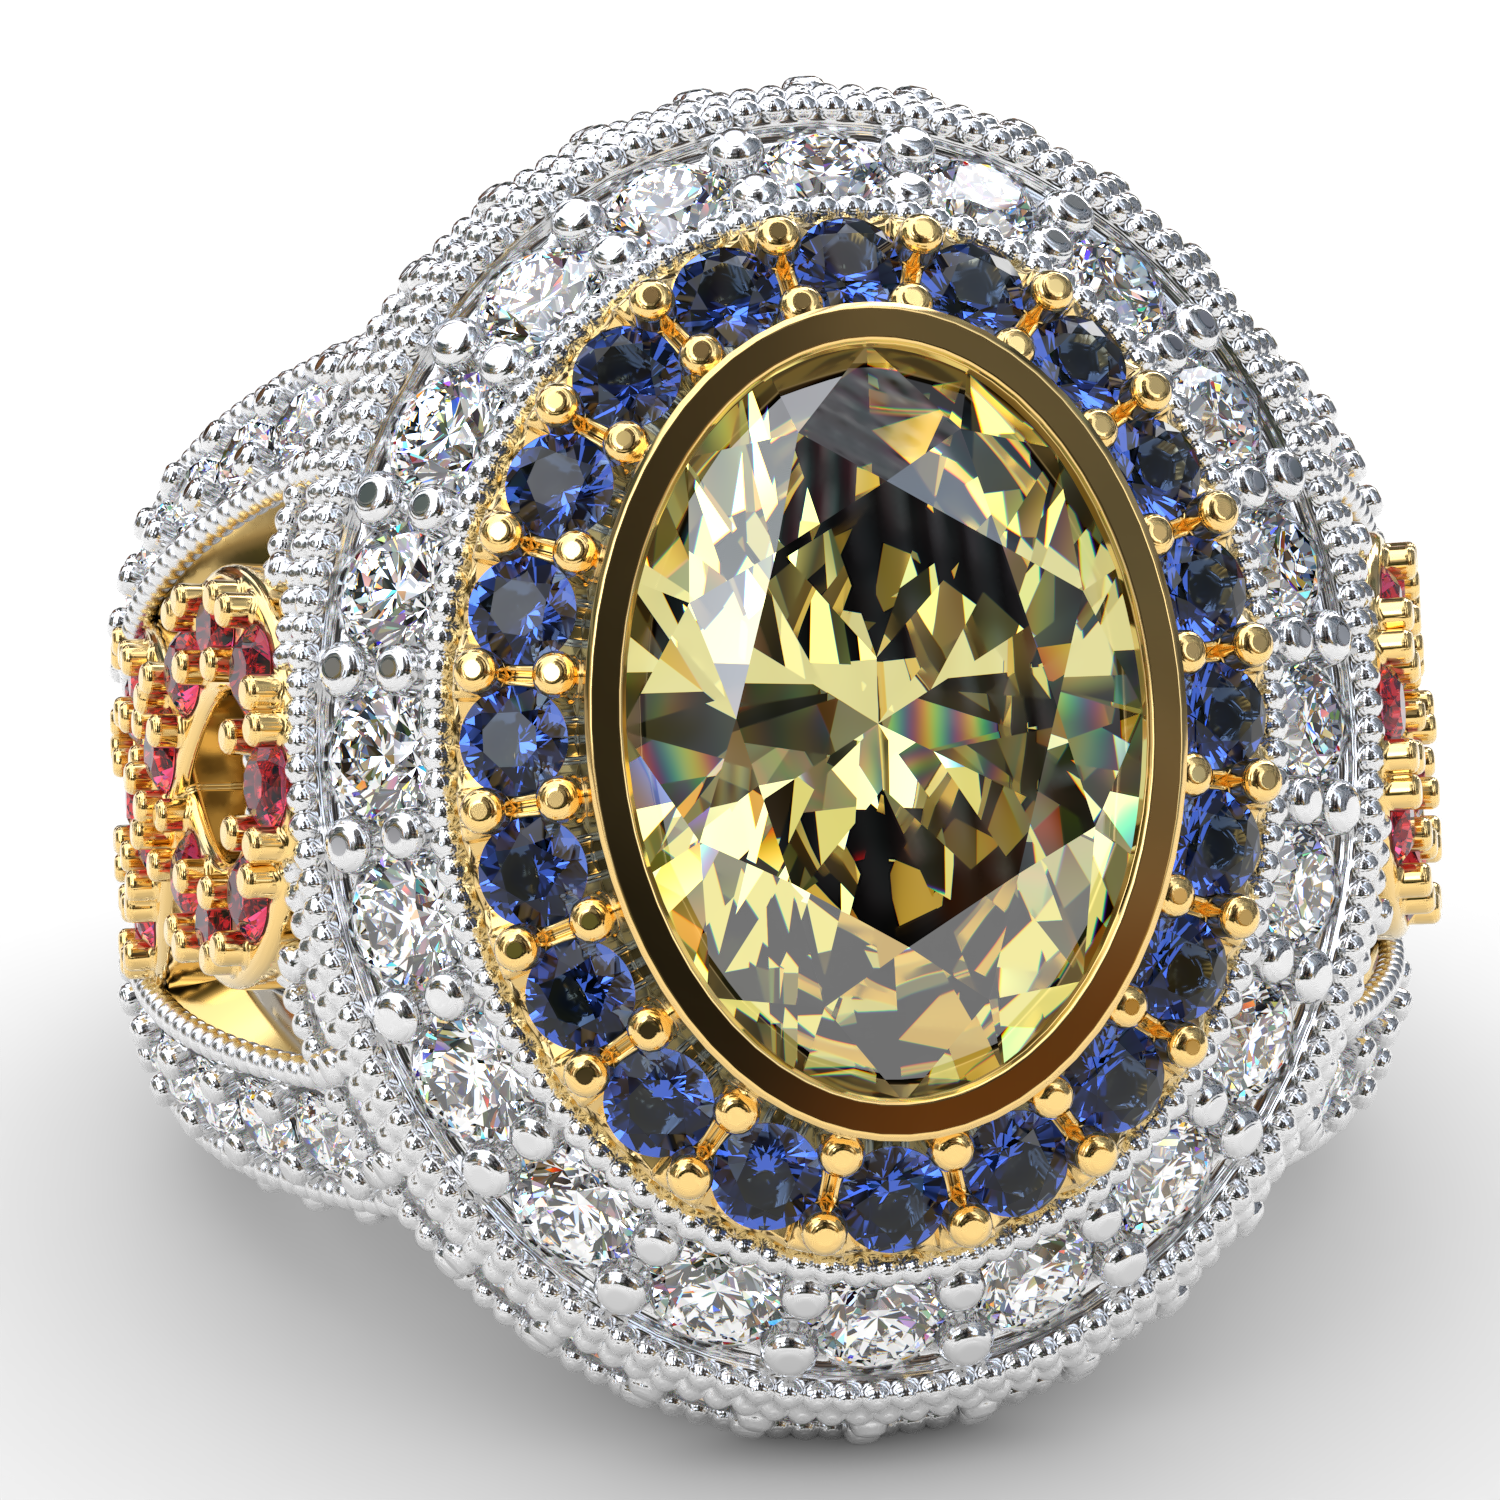 Cocktail ring with yellow diamond center, sapphire adn ruby accents